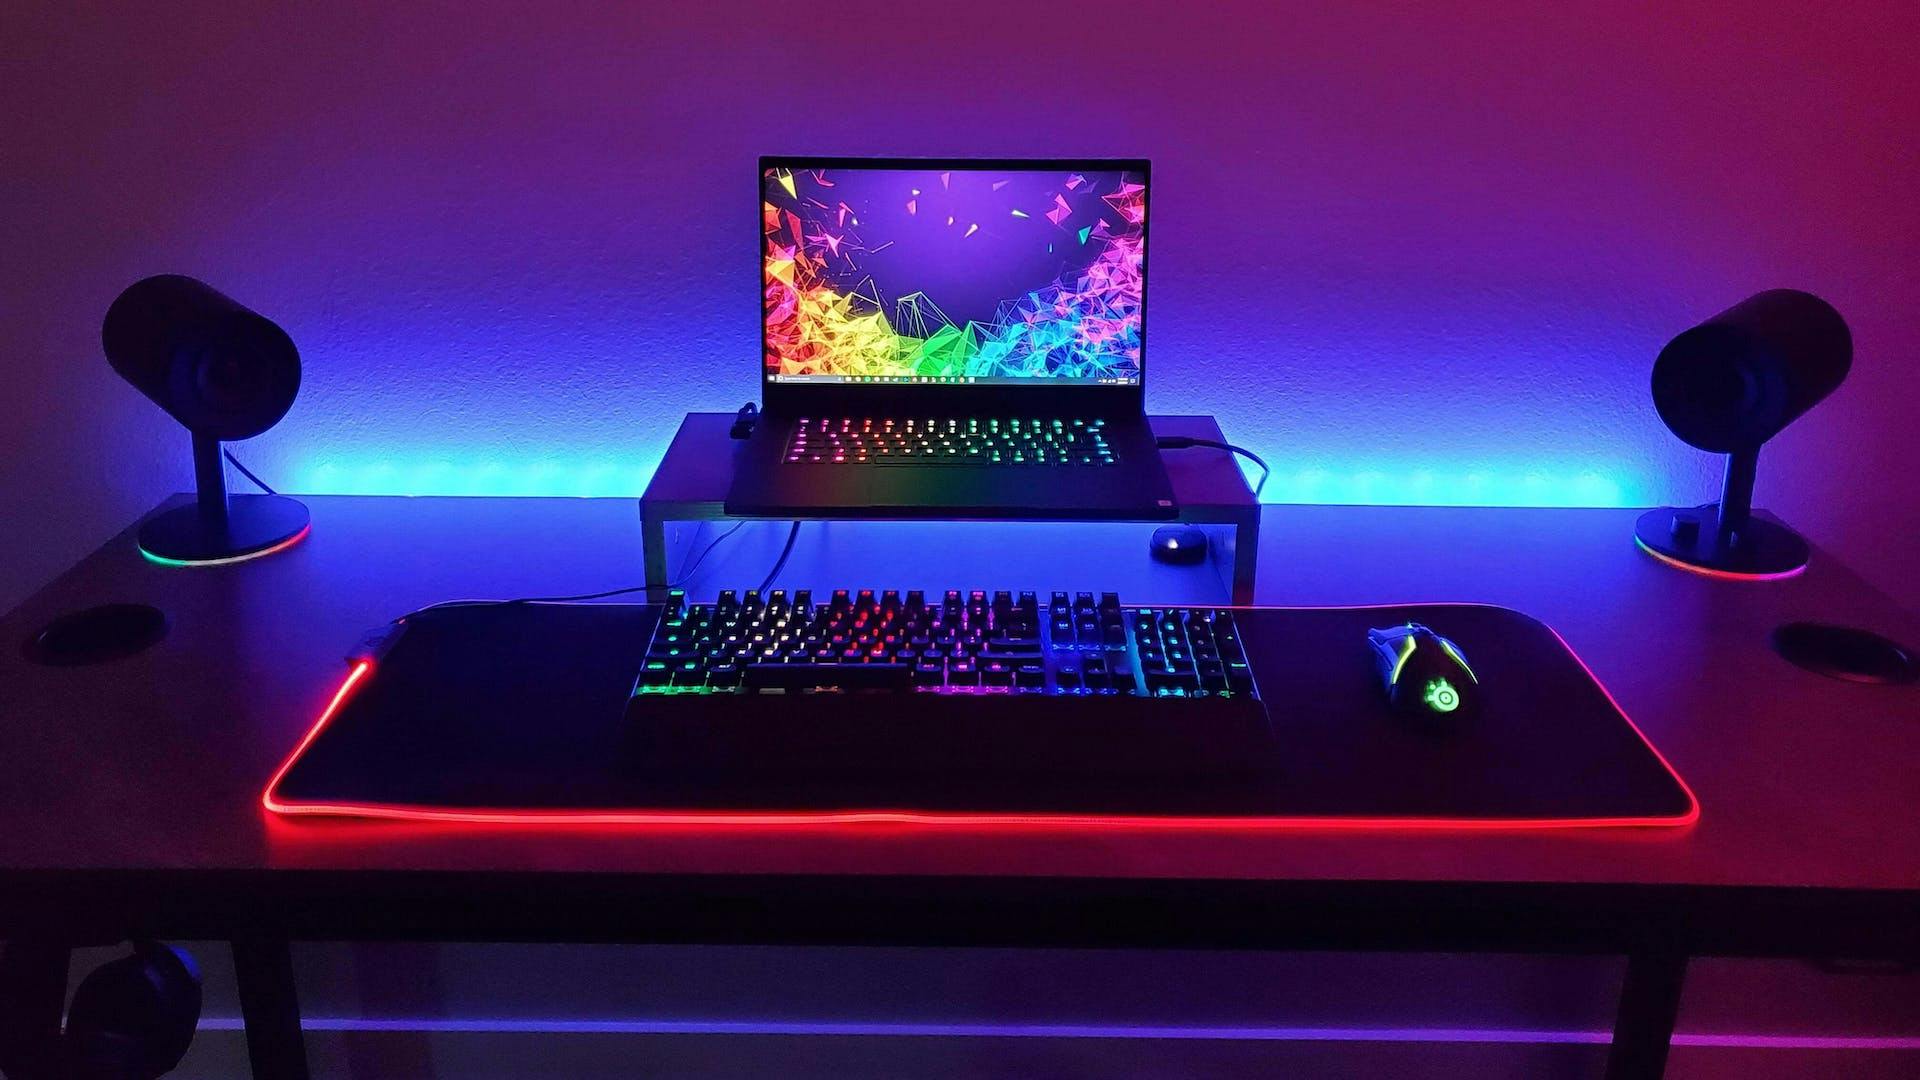 On a table without decoration but with many colorful gaming LED elements, a laptop stands frontally somewhat elevated behind a gaming keyboard.